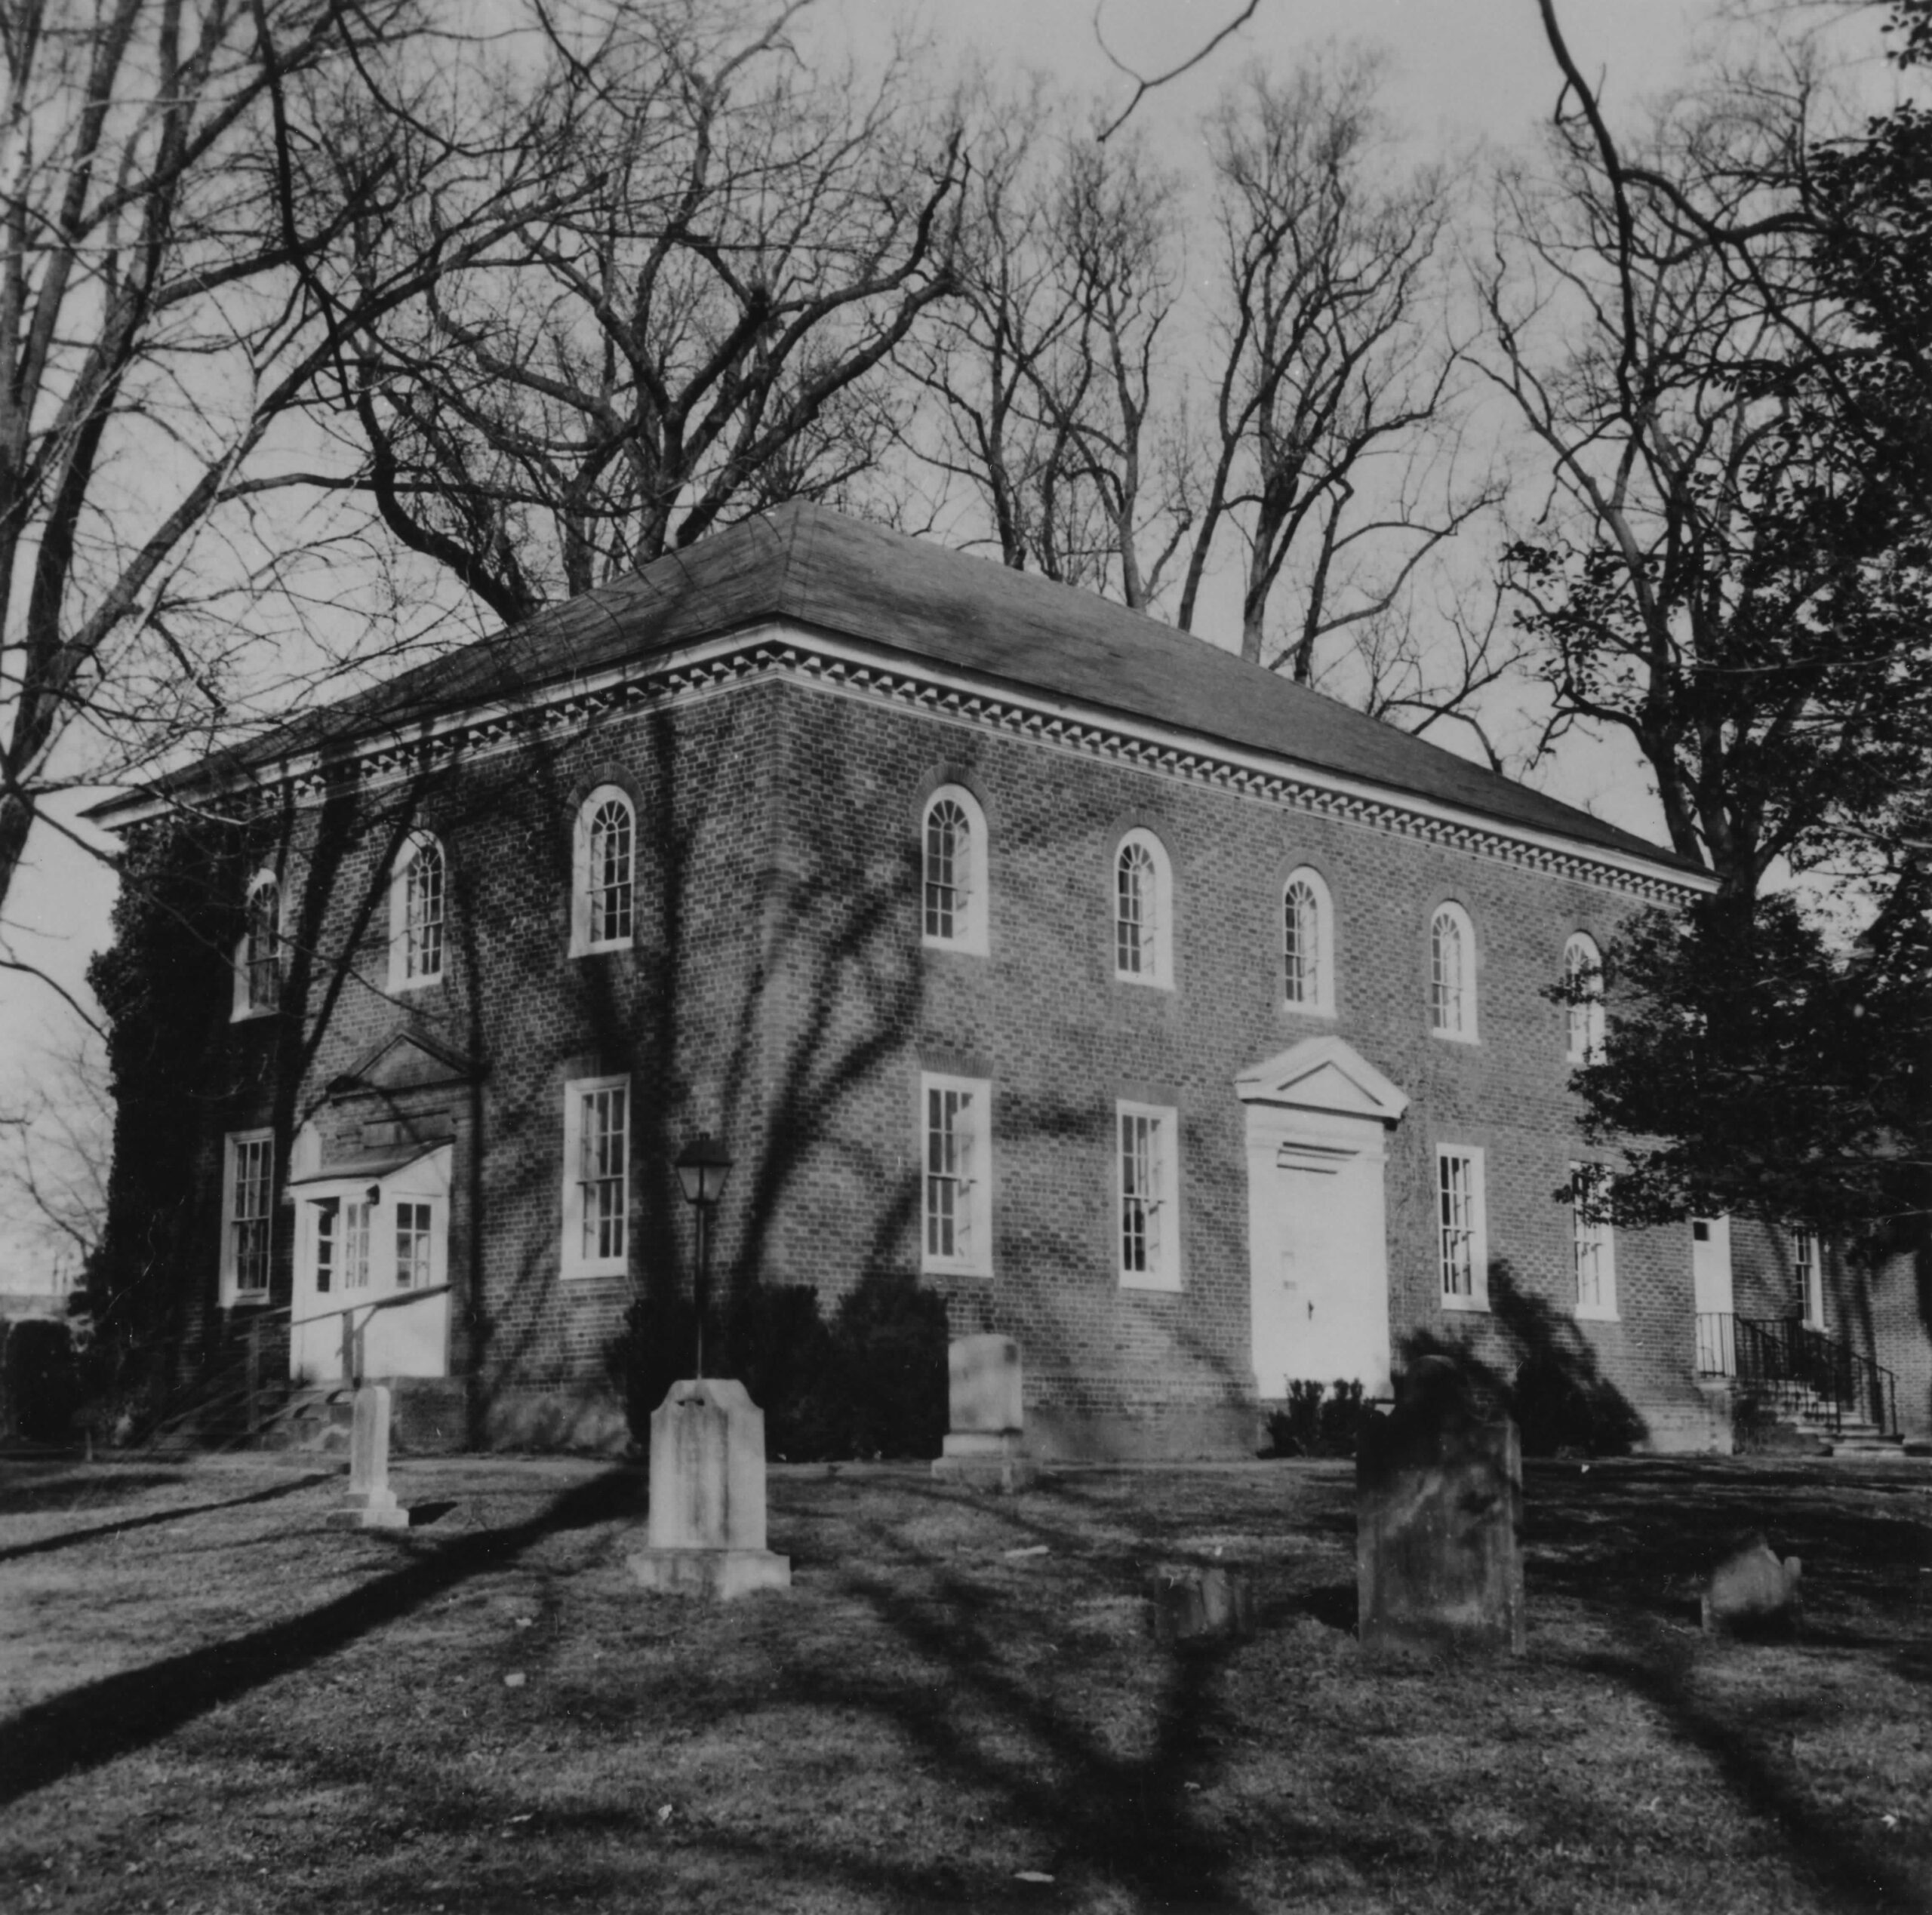 Southwest Elevation.  Photo credit: The Library of Virginia, 1958